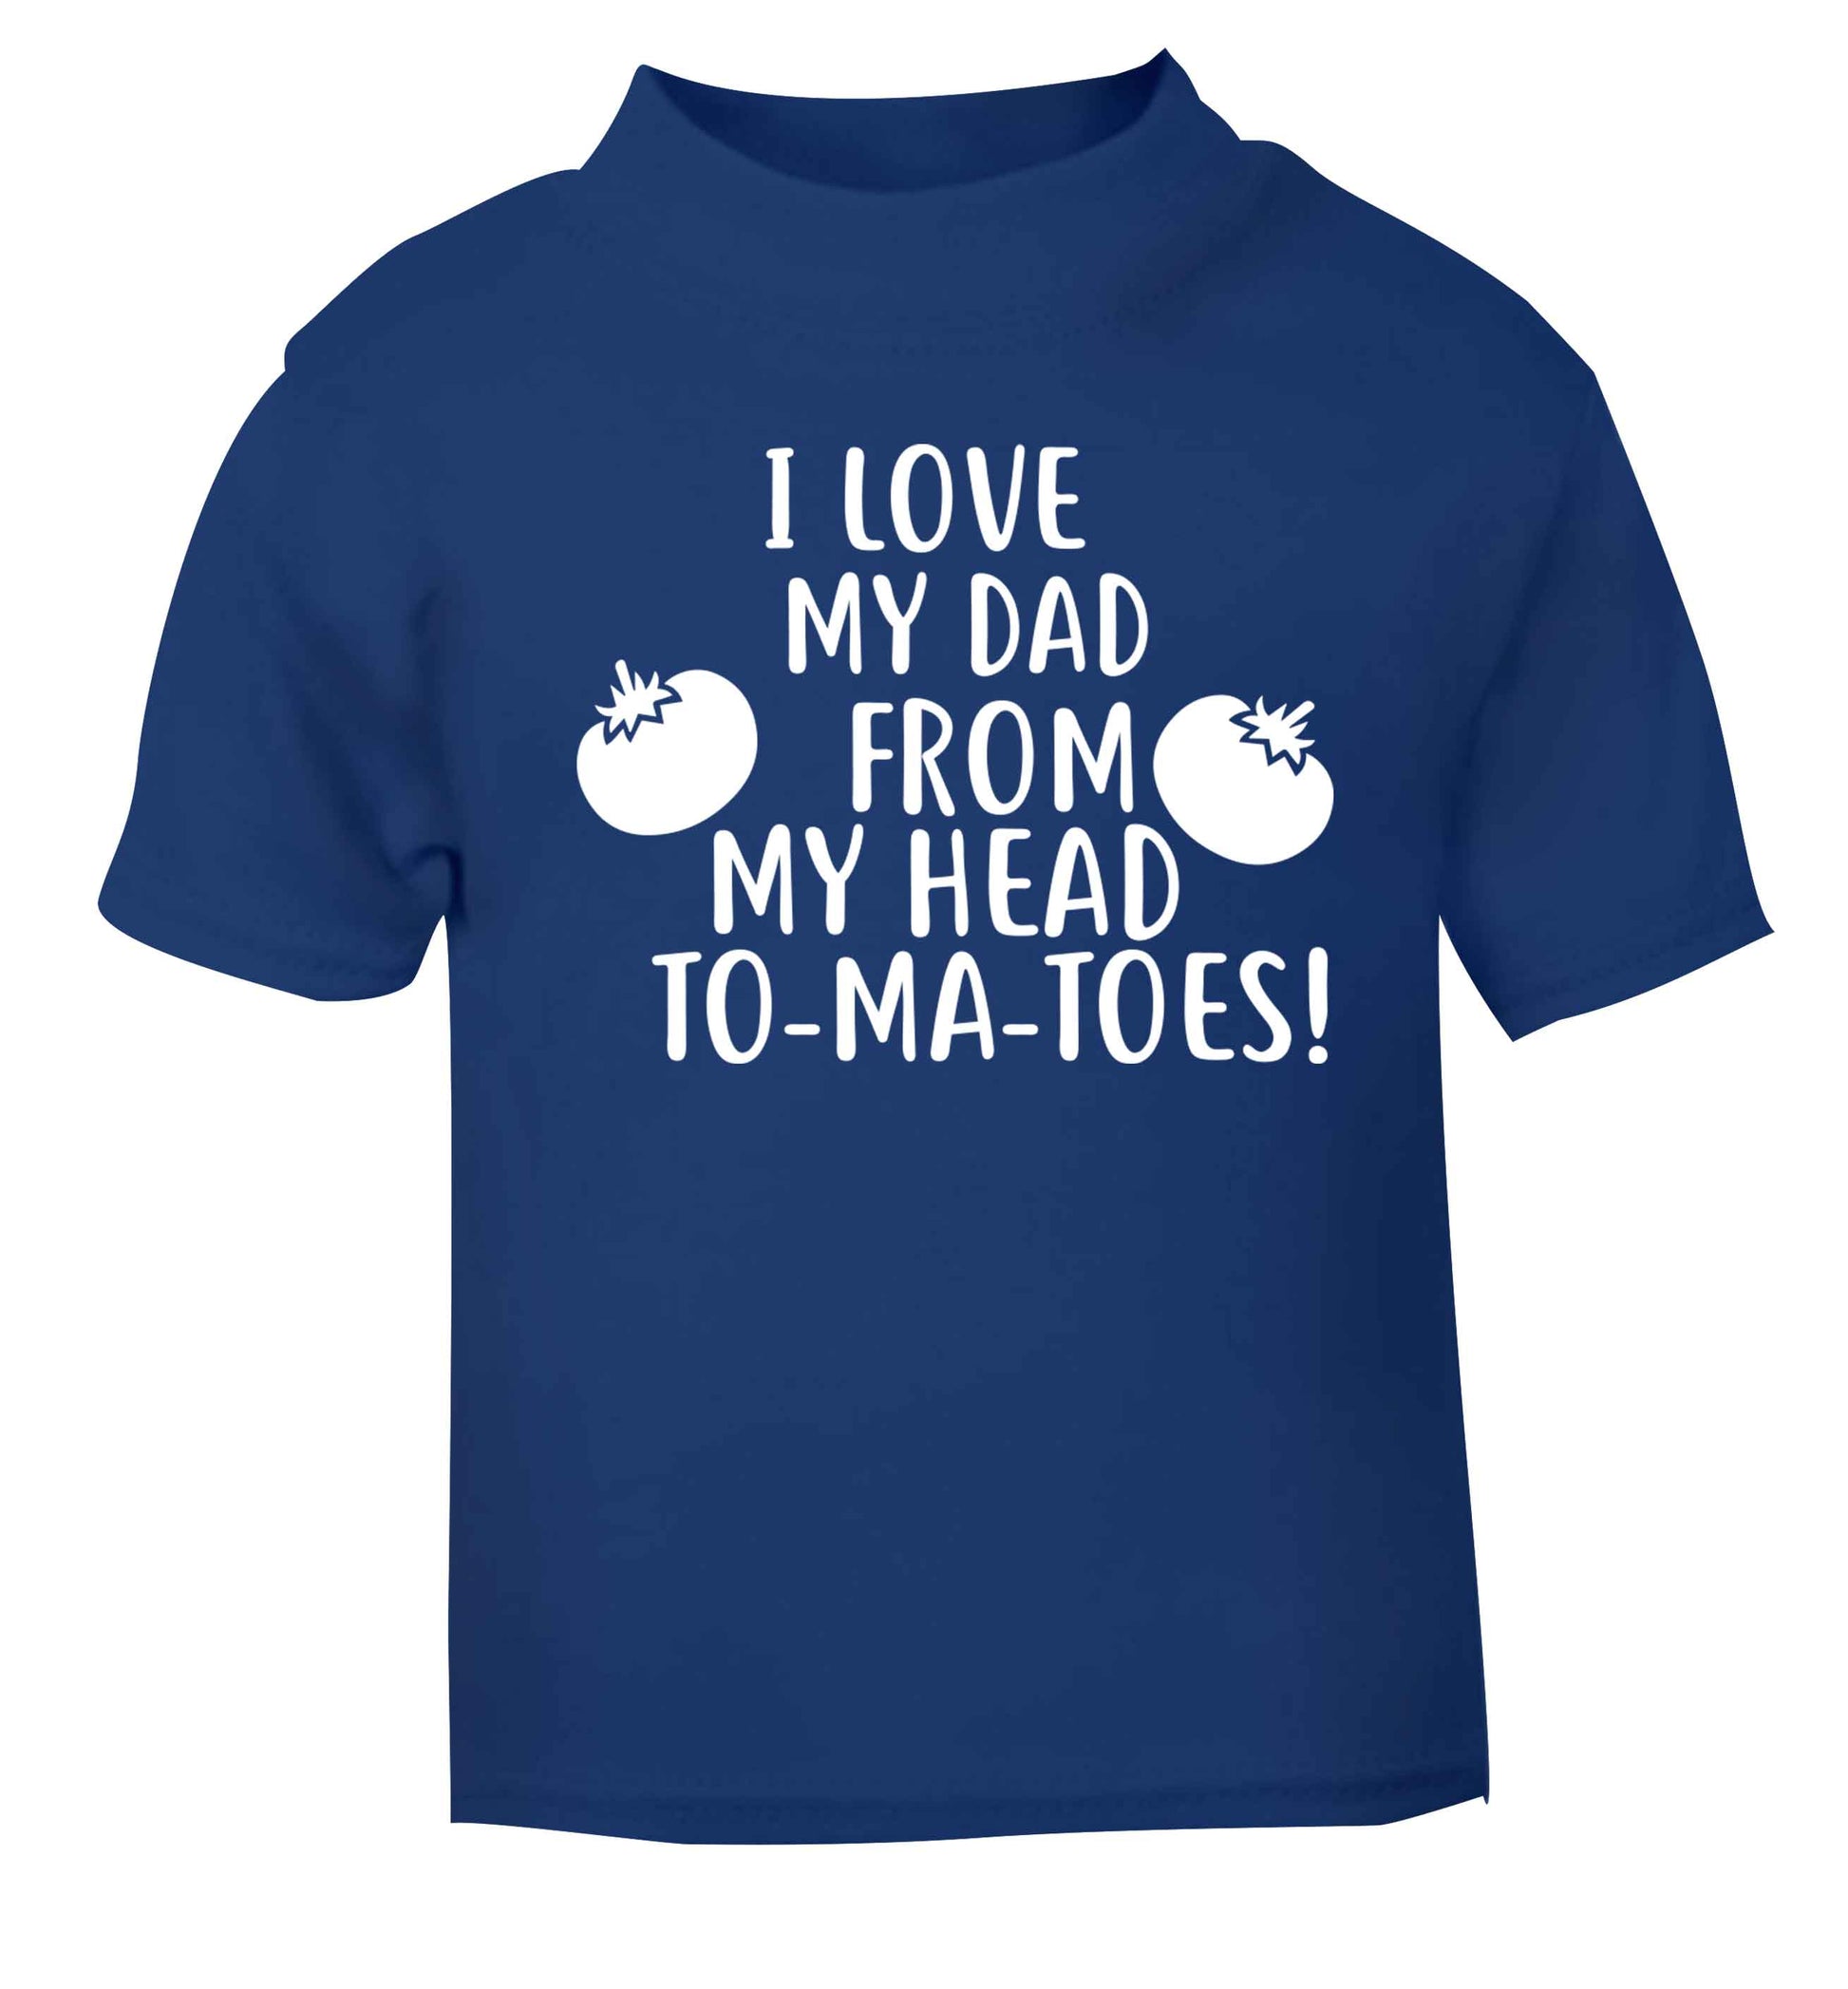 I love my dad from my head to-ma-toes blue baby toddler Tshirt 2 Years